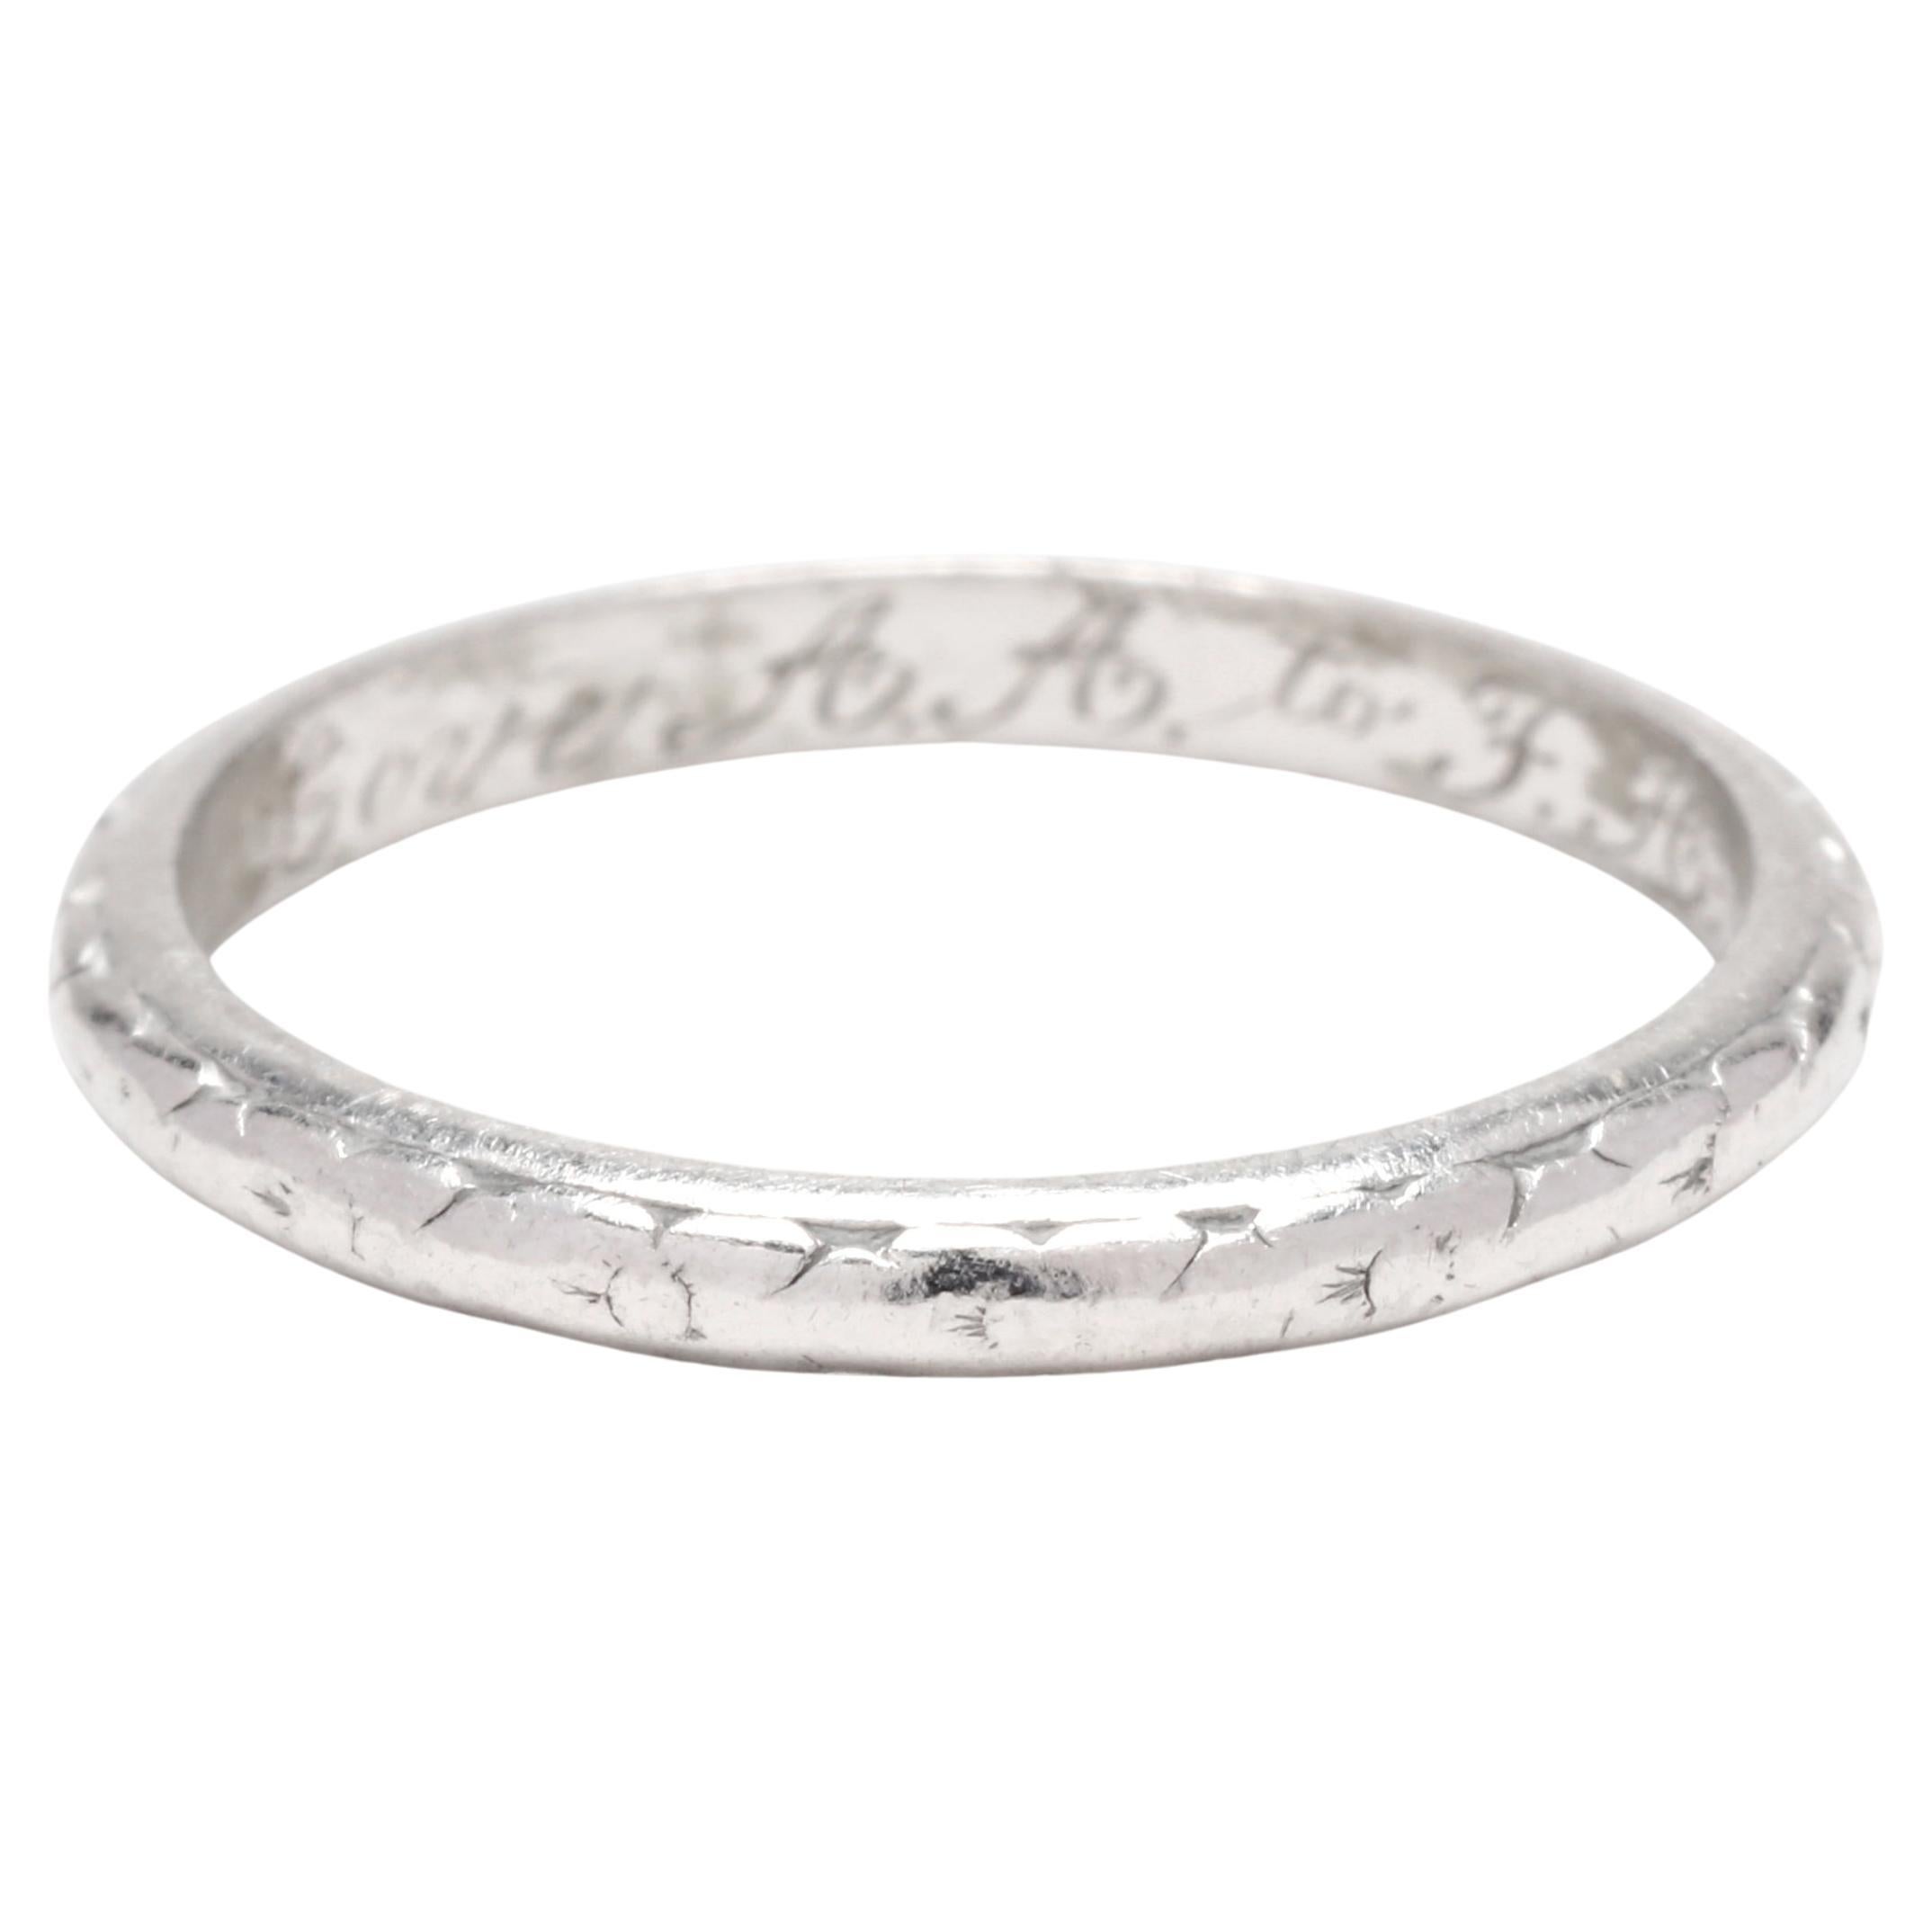 Art Deco Floral Engraved Wedding Band, Platinum, Ring Size 5.5, Thin Stackable